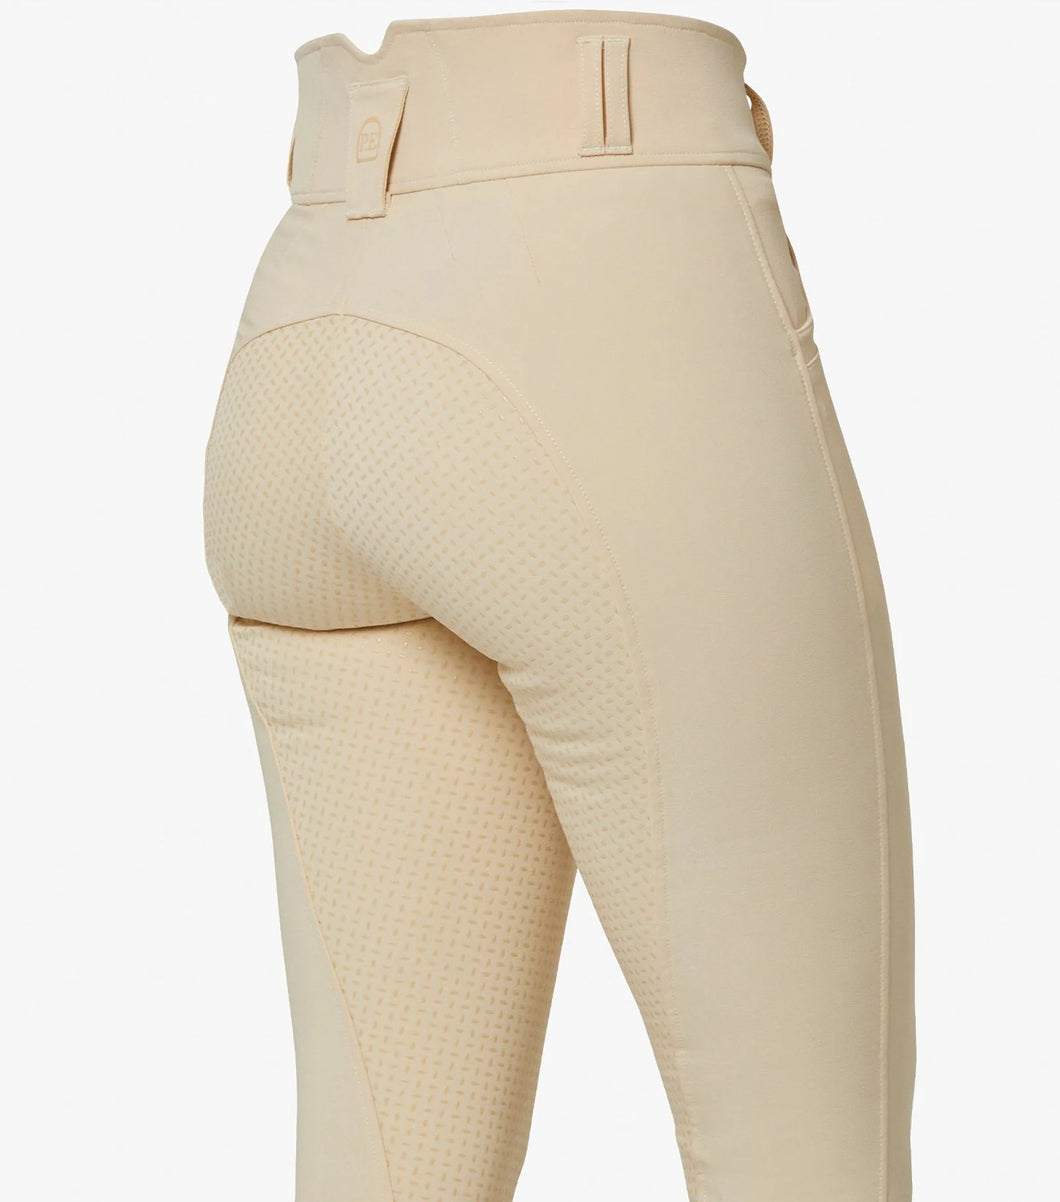 Sophia Ladies Full Seat High Waist Competition Riding Breeches